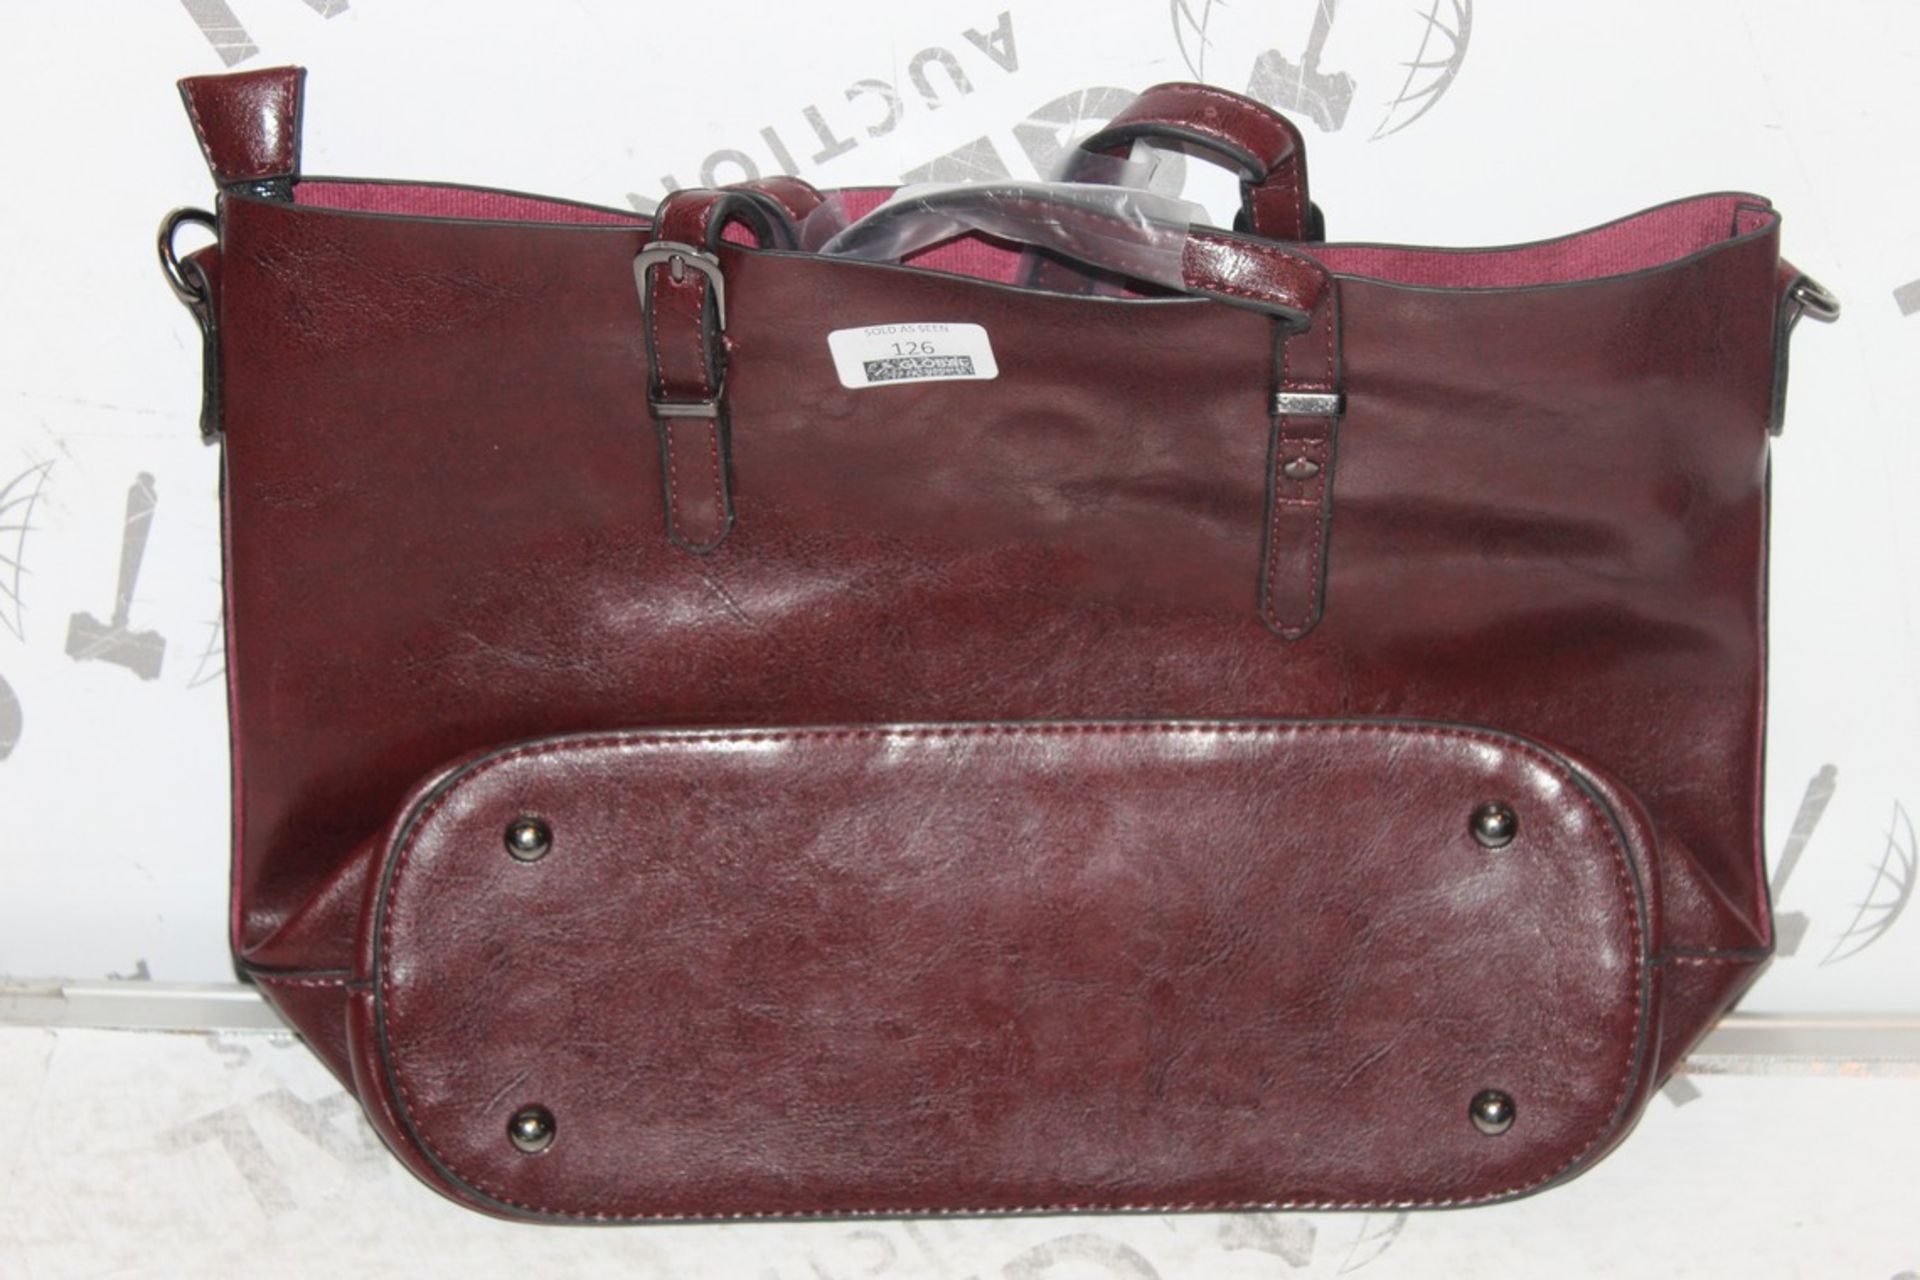 Brand New Womens, Coolives, Burgundy Red Leather, Tote Shoulder Bag, RRP £55.00